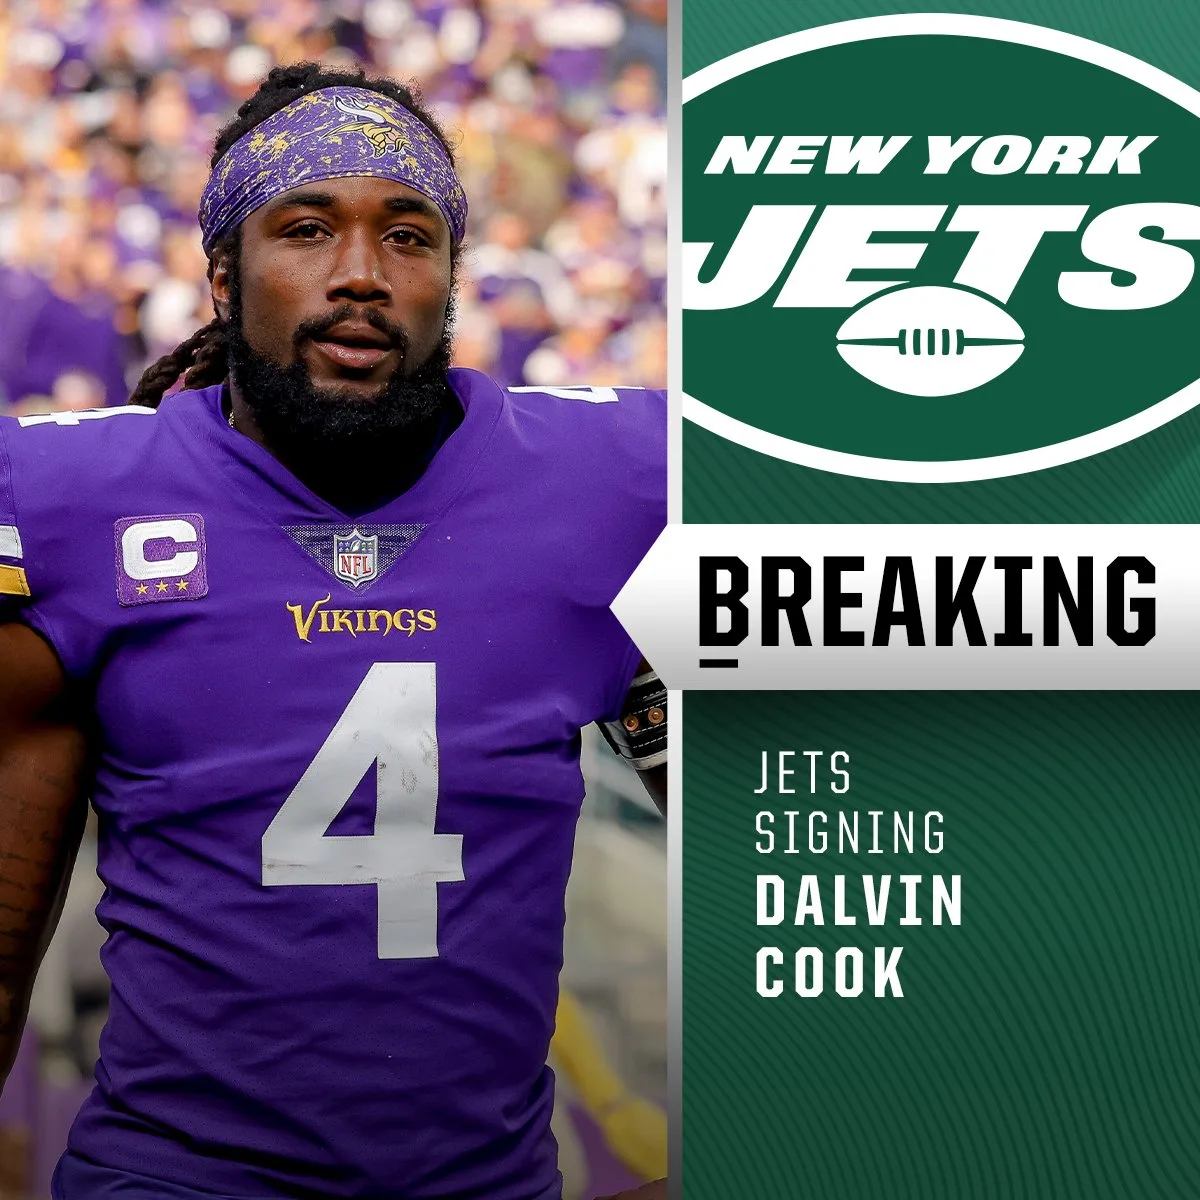 NFL Juice | Dalvin Cook Joins the New York Jets: A Dynamic Addition to Their Offense